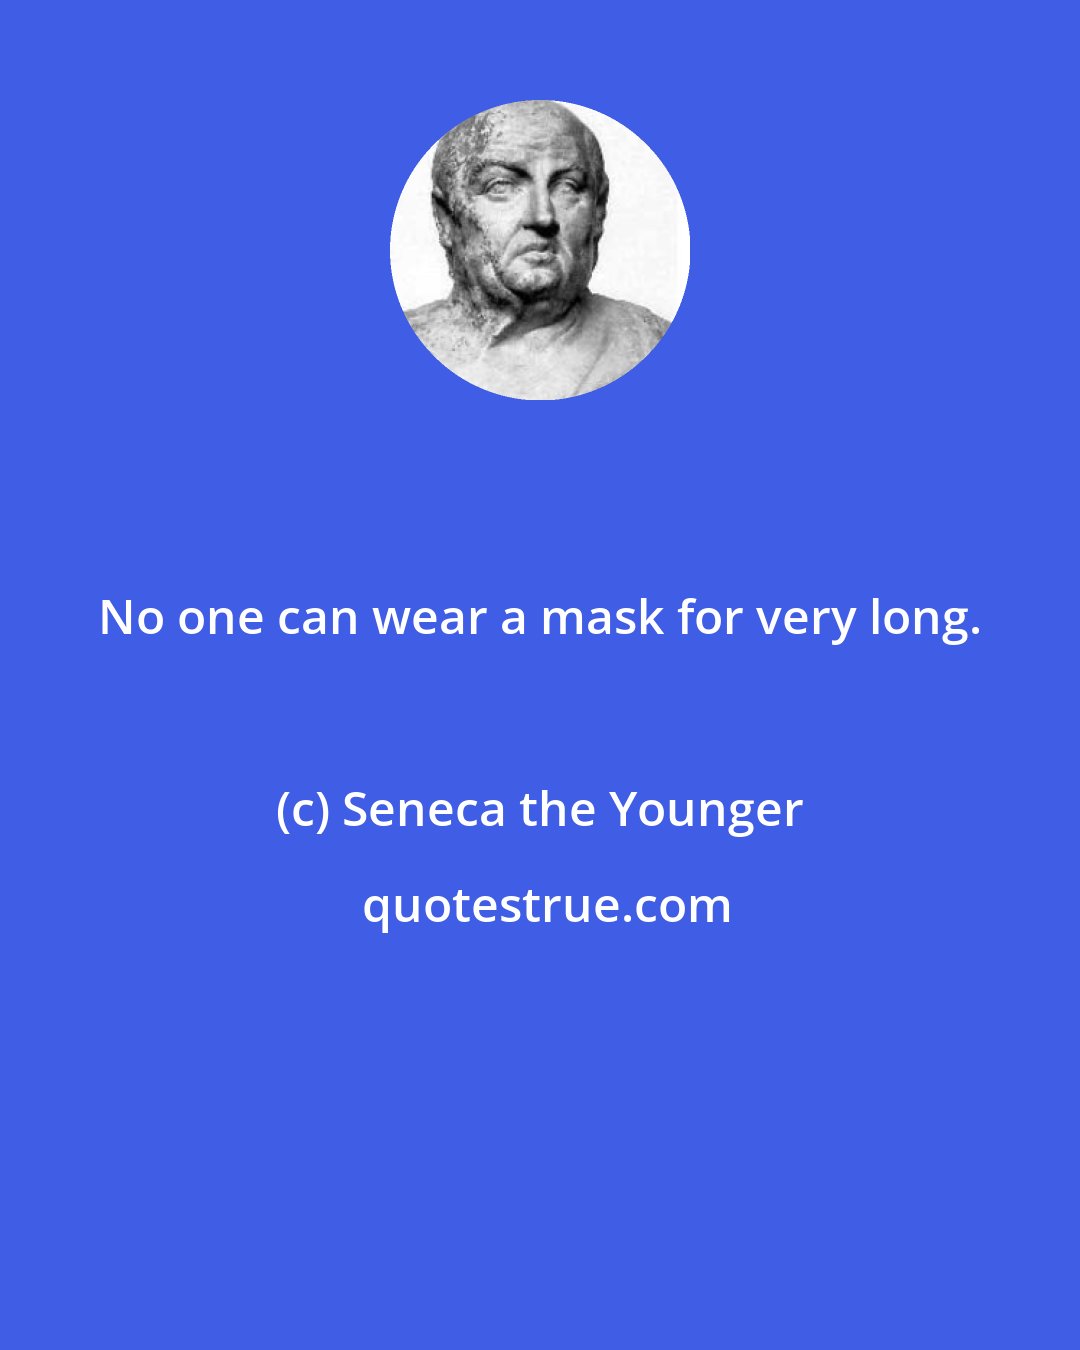 Seneca the Younger: No one can wear a mask for very long.